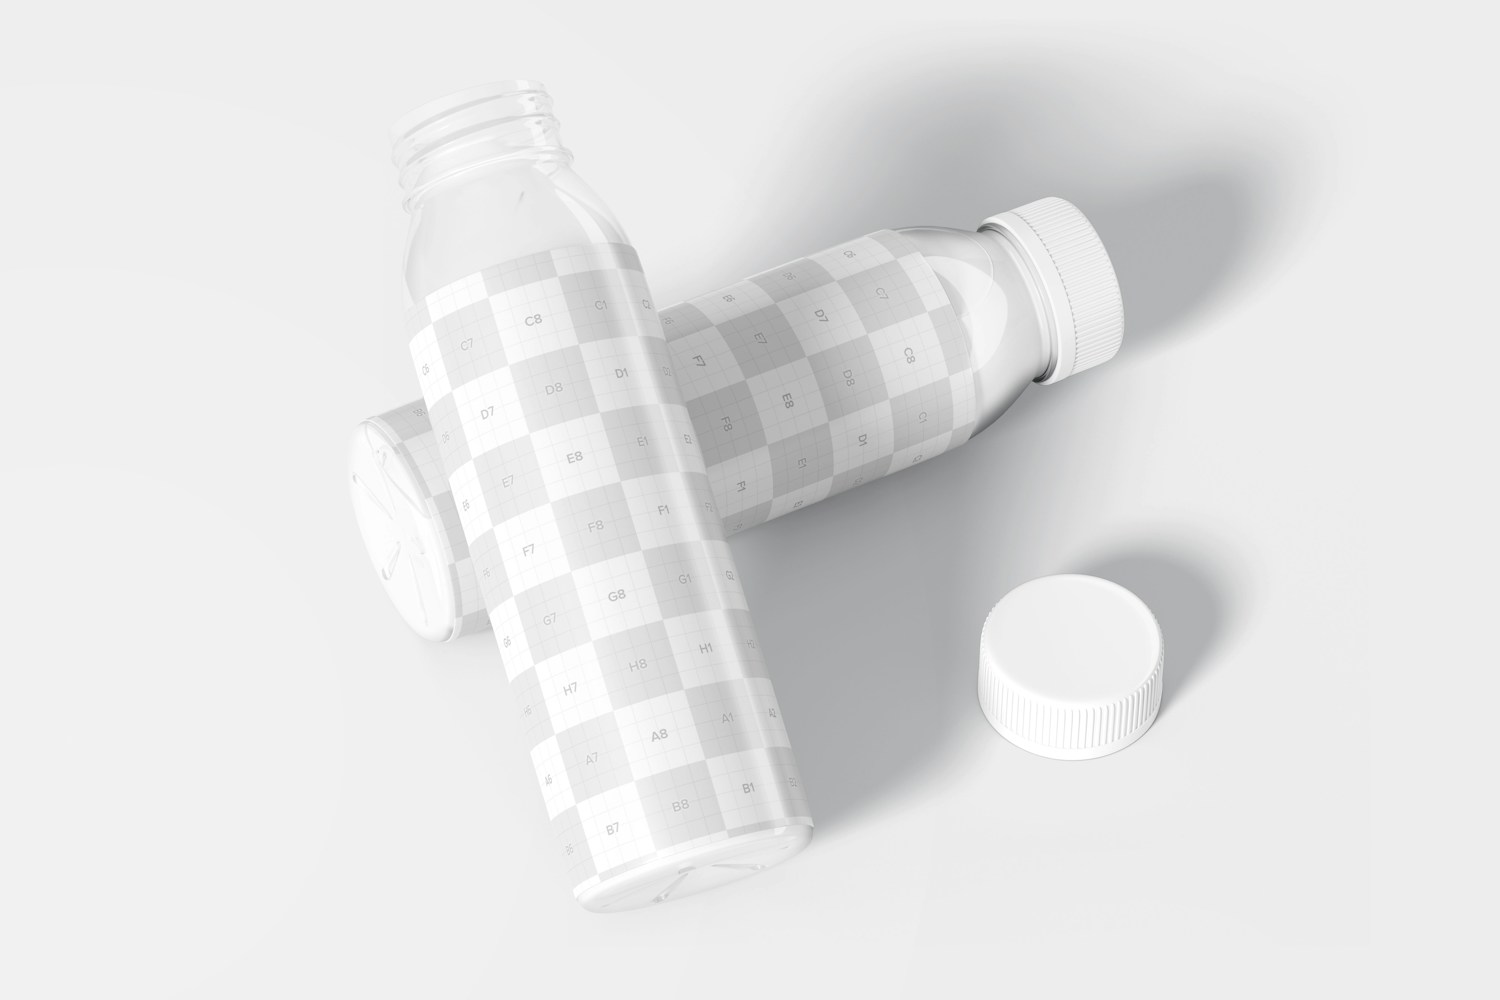 10 oz Clear PET Juice Bottles Mockup, Opened and Closed